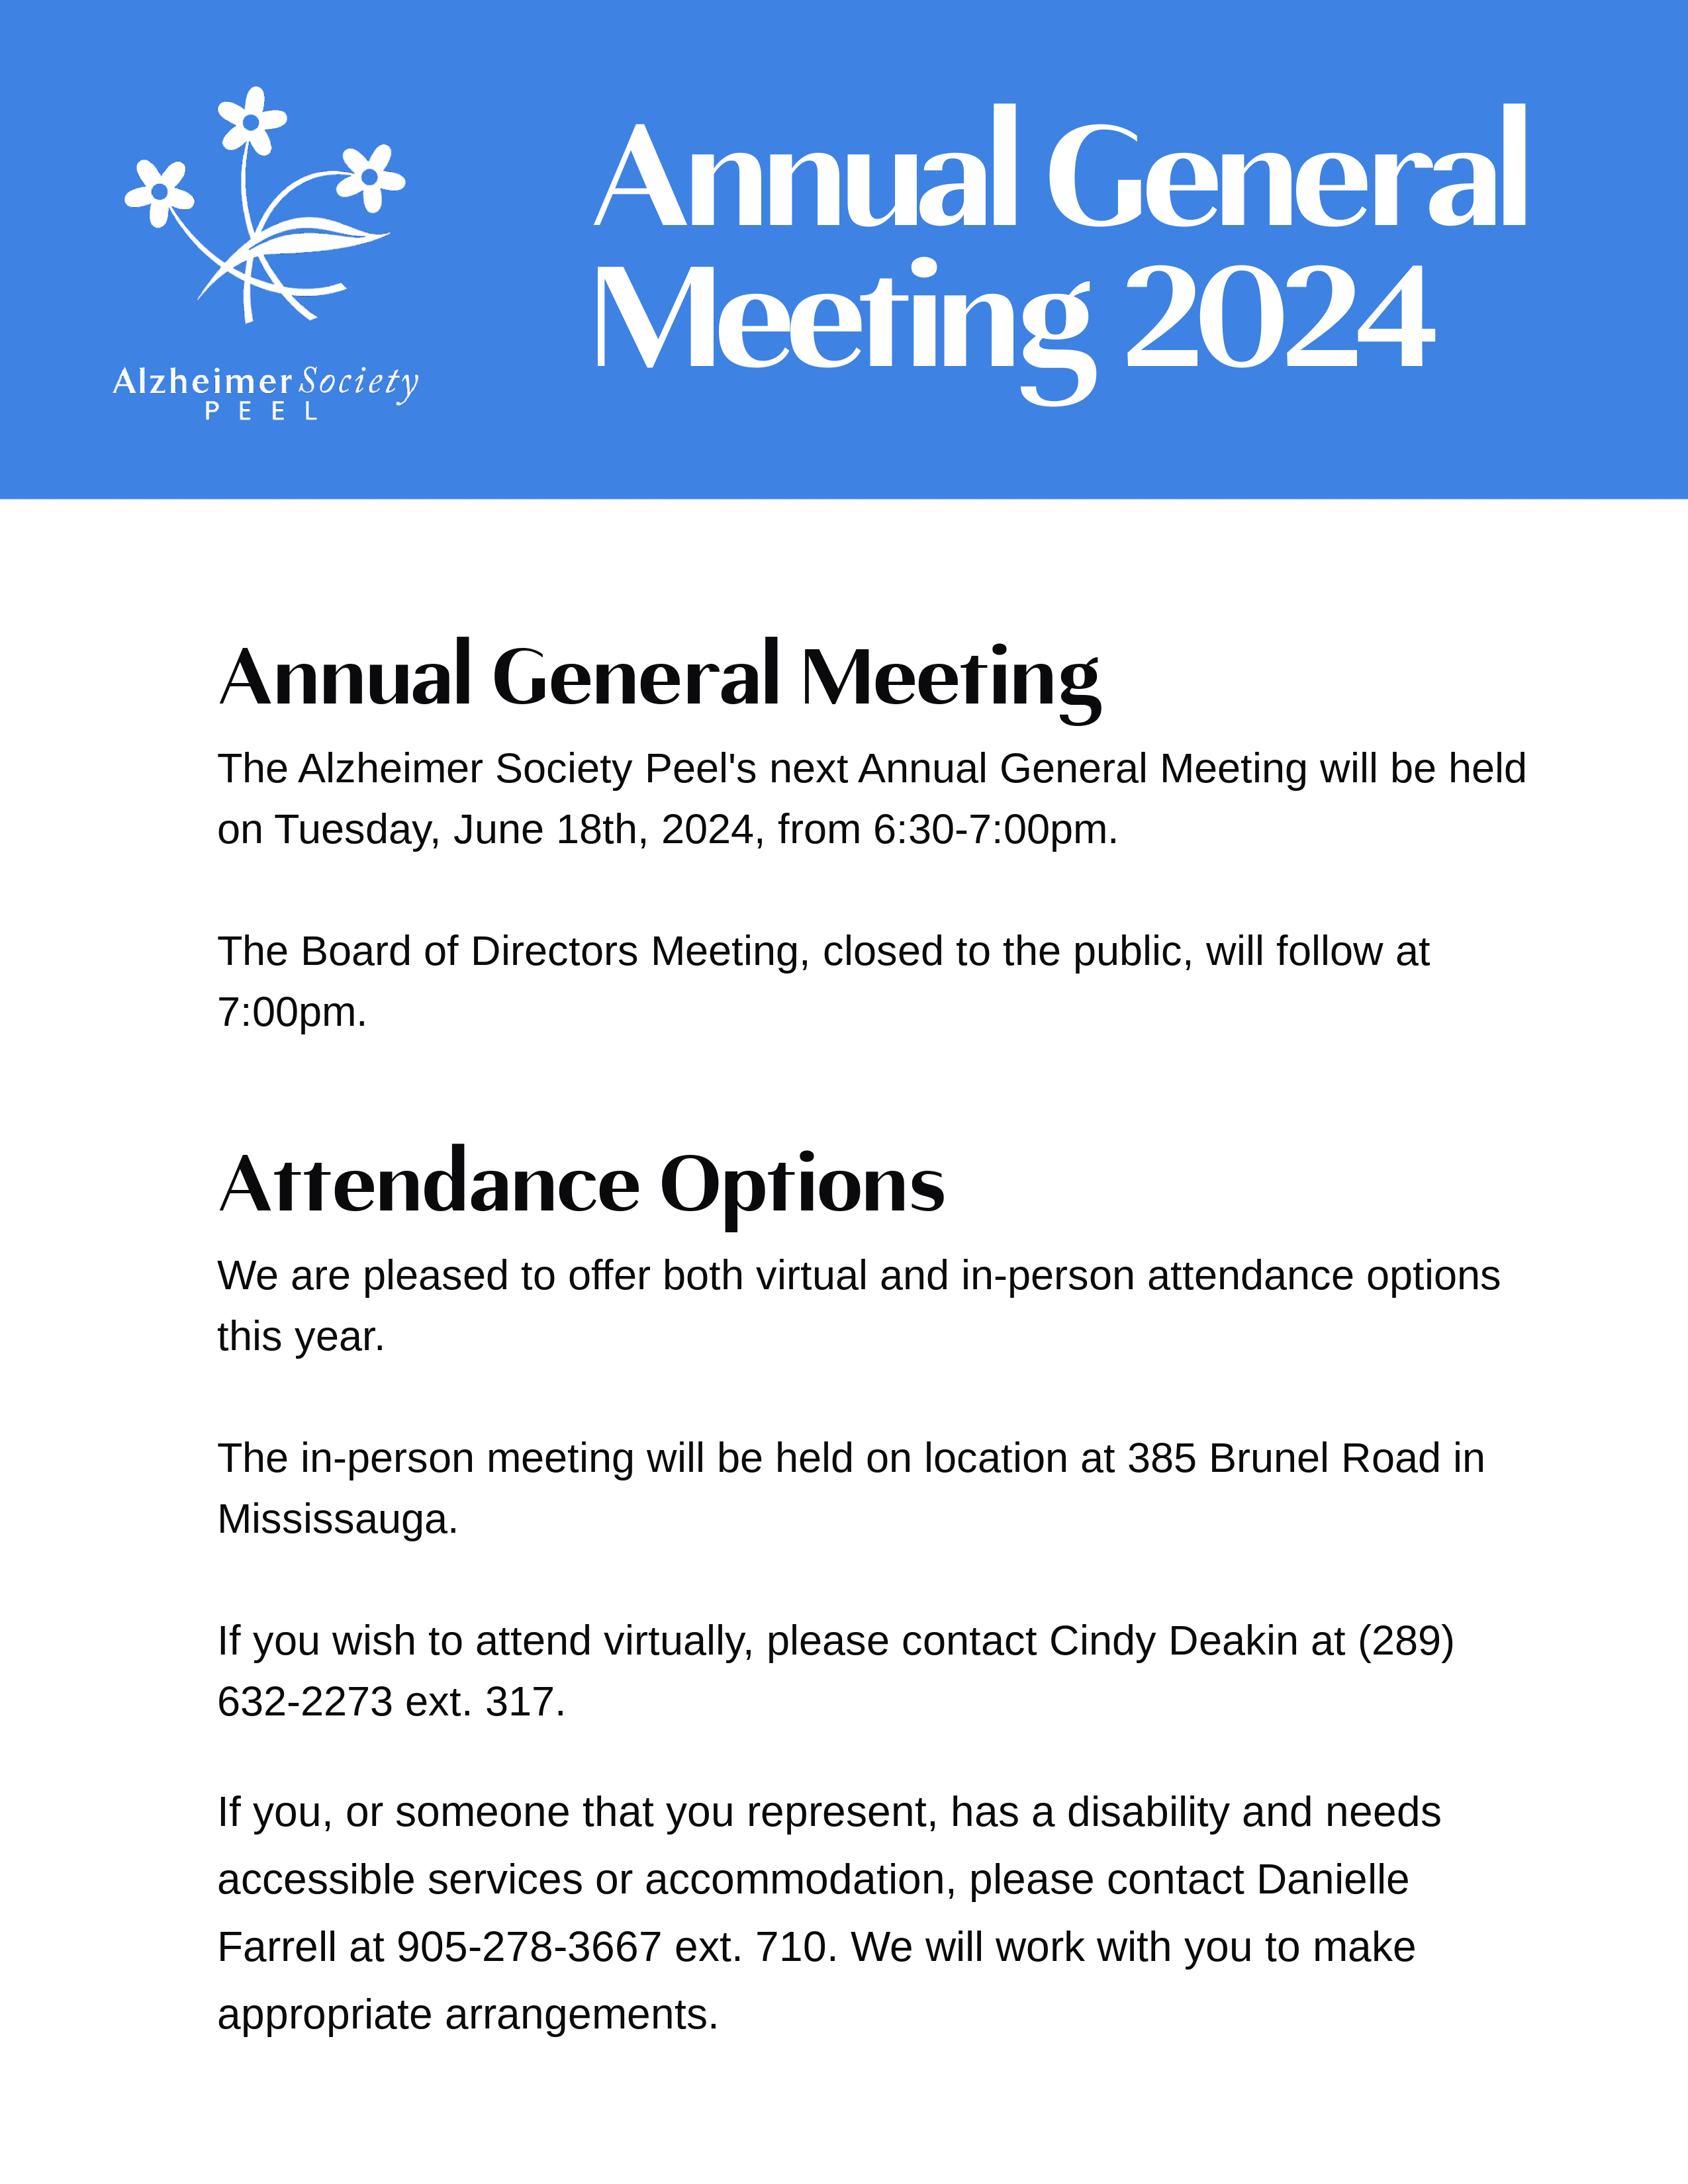 Flyer for AGM 2024. Plain text available below.